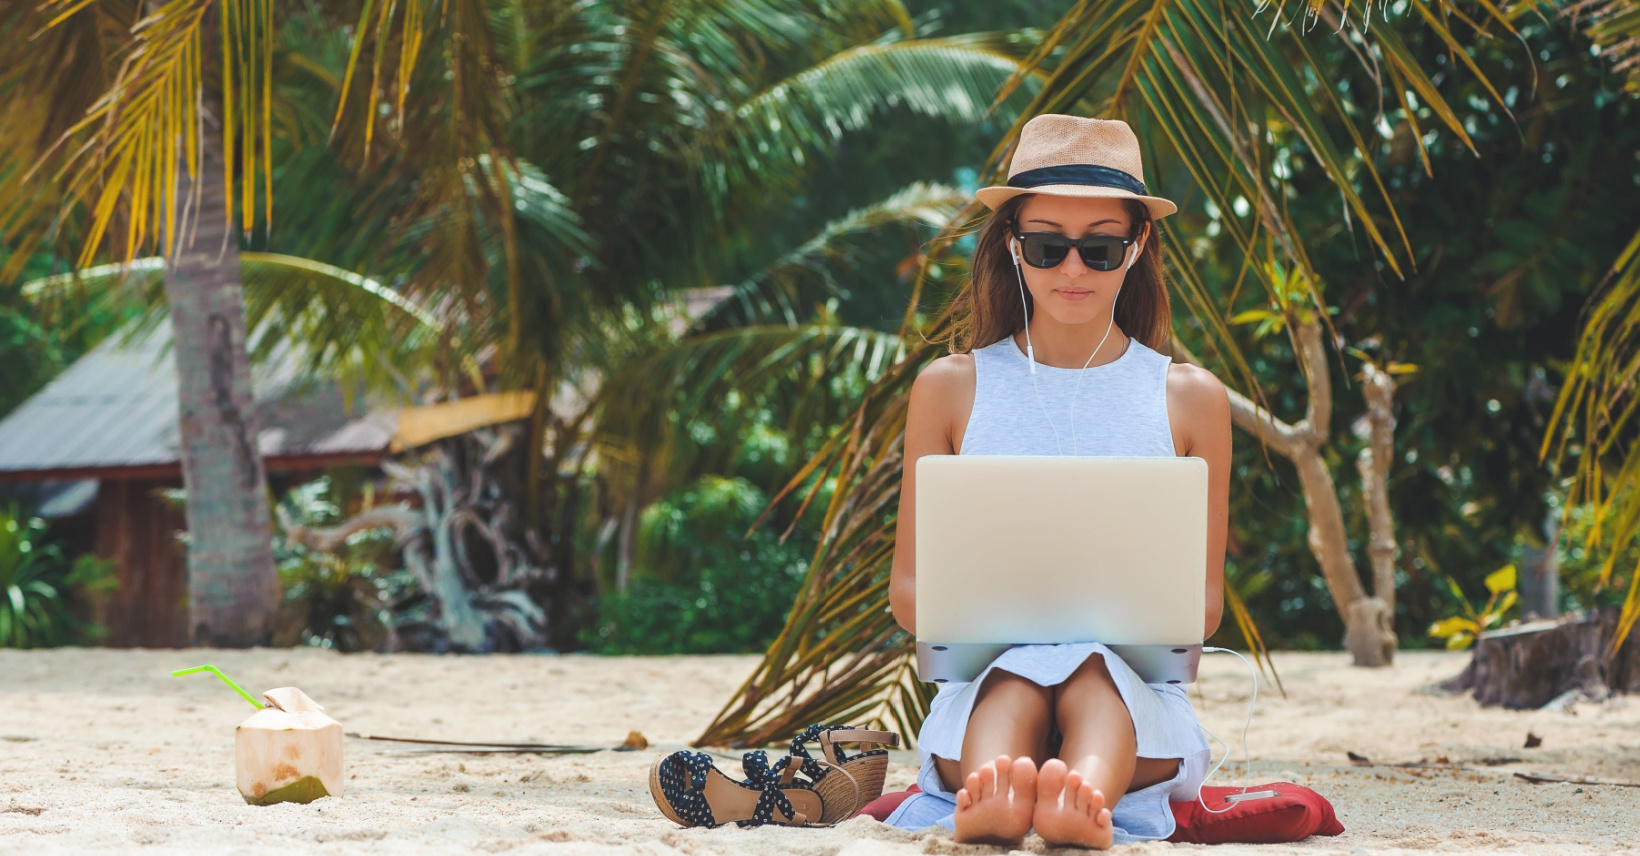 How To Become A Digital Nomad And Work From Anywhere In The World